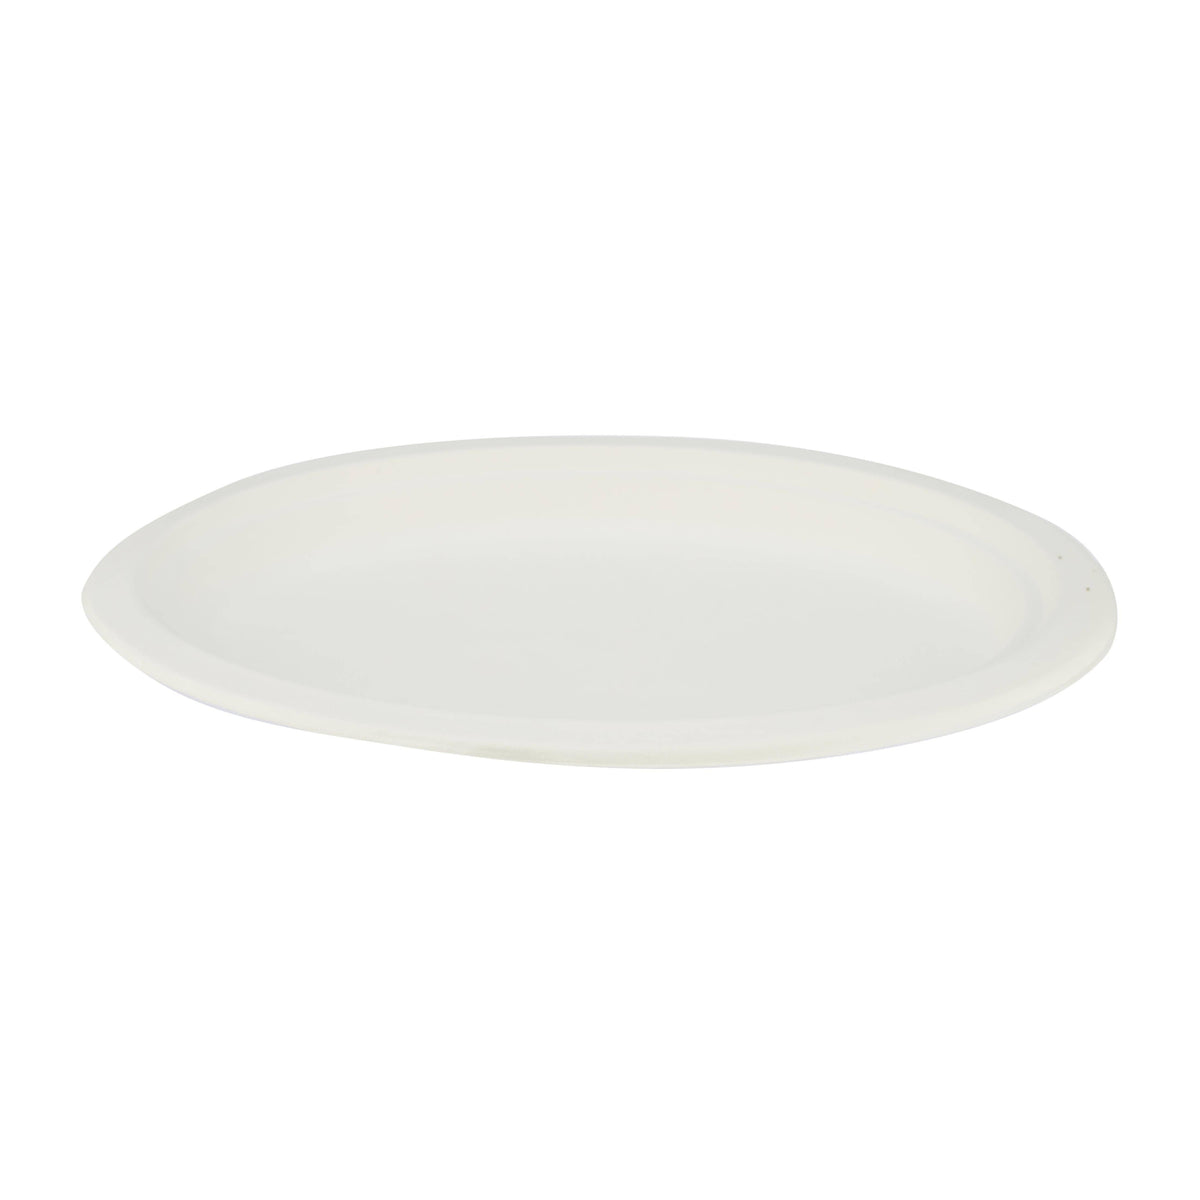 Bio-Degradable Oval Plate 10x8 Inch 200 Pieces - Hotpack Global